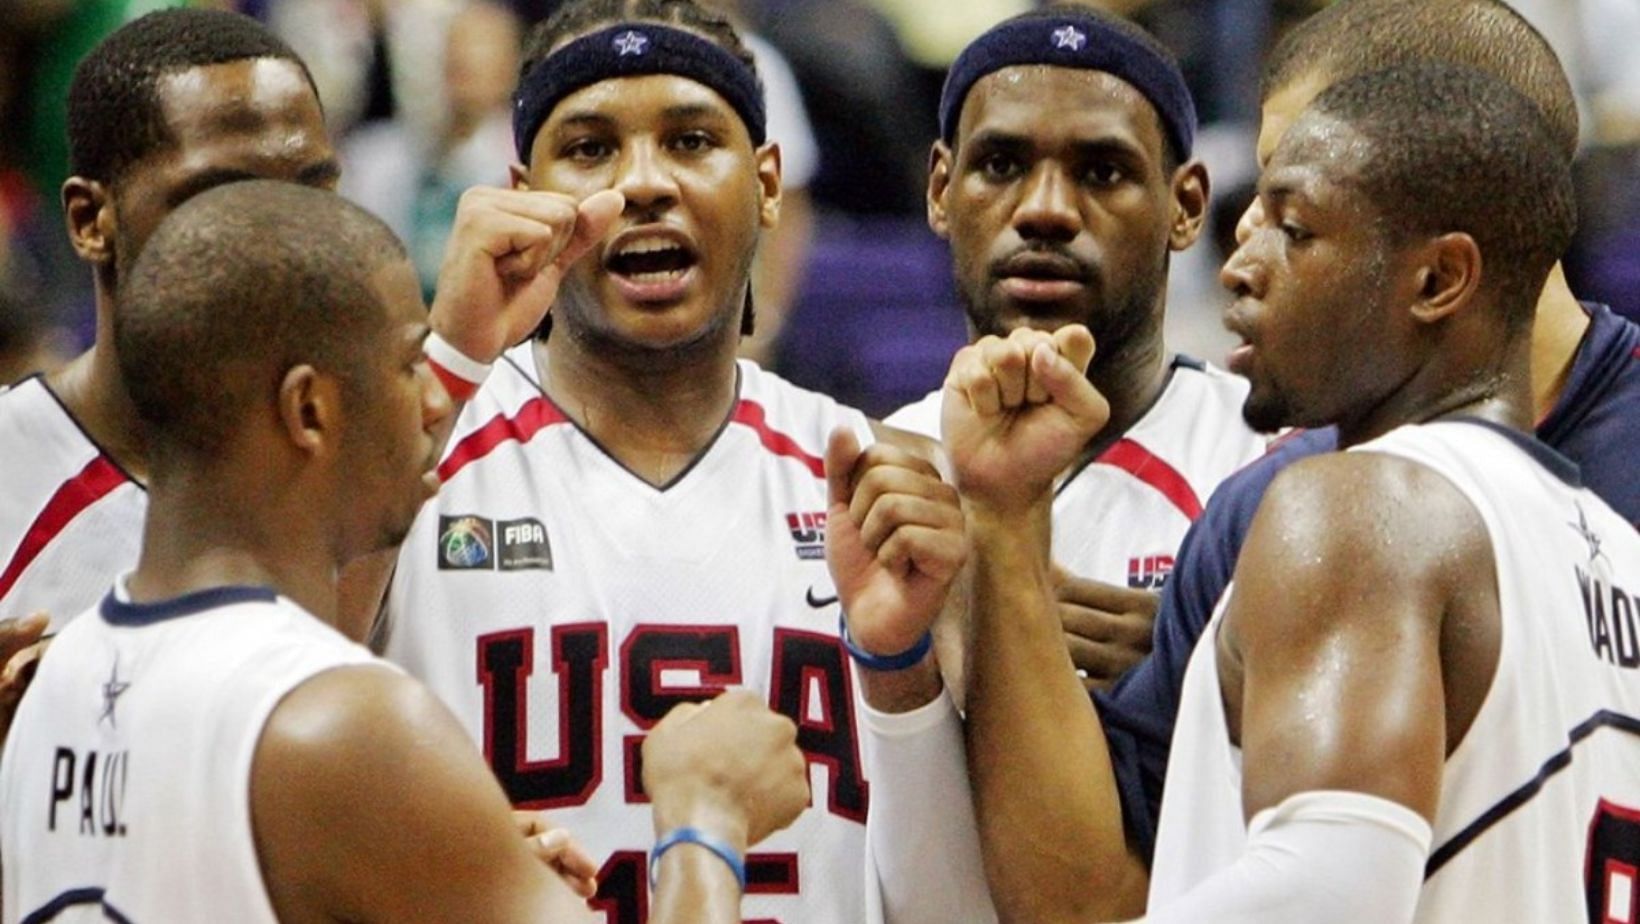 Chris Paul was one of the &quot;rookies&quot; in the 2006 USA basketball team that competed in the World Cup.